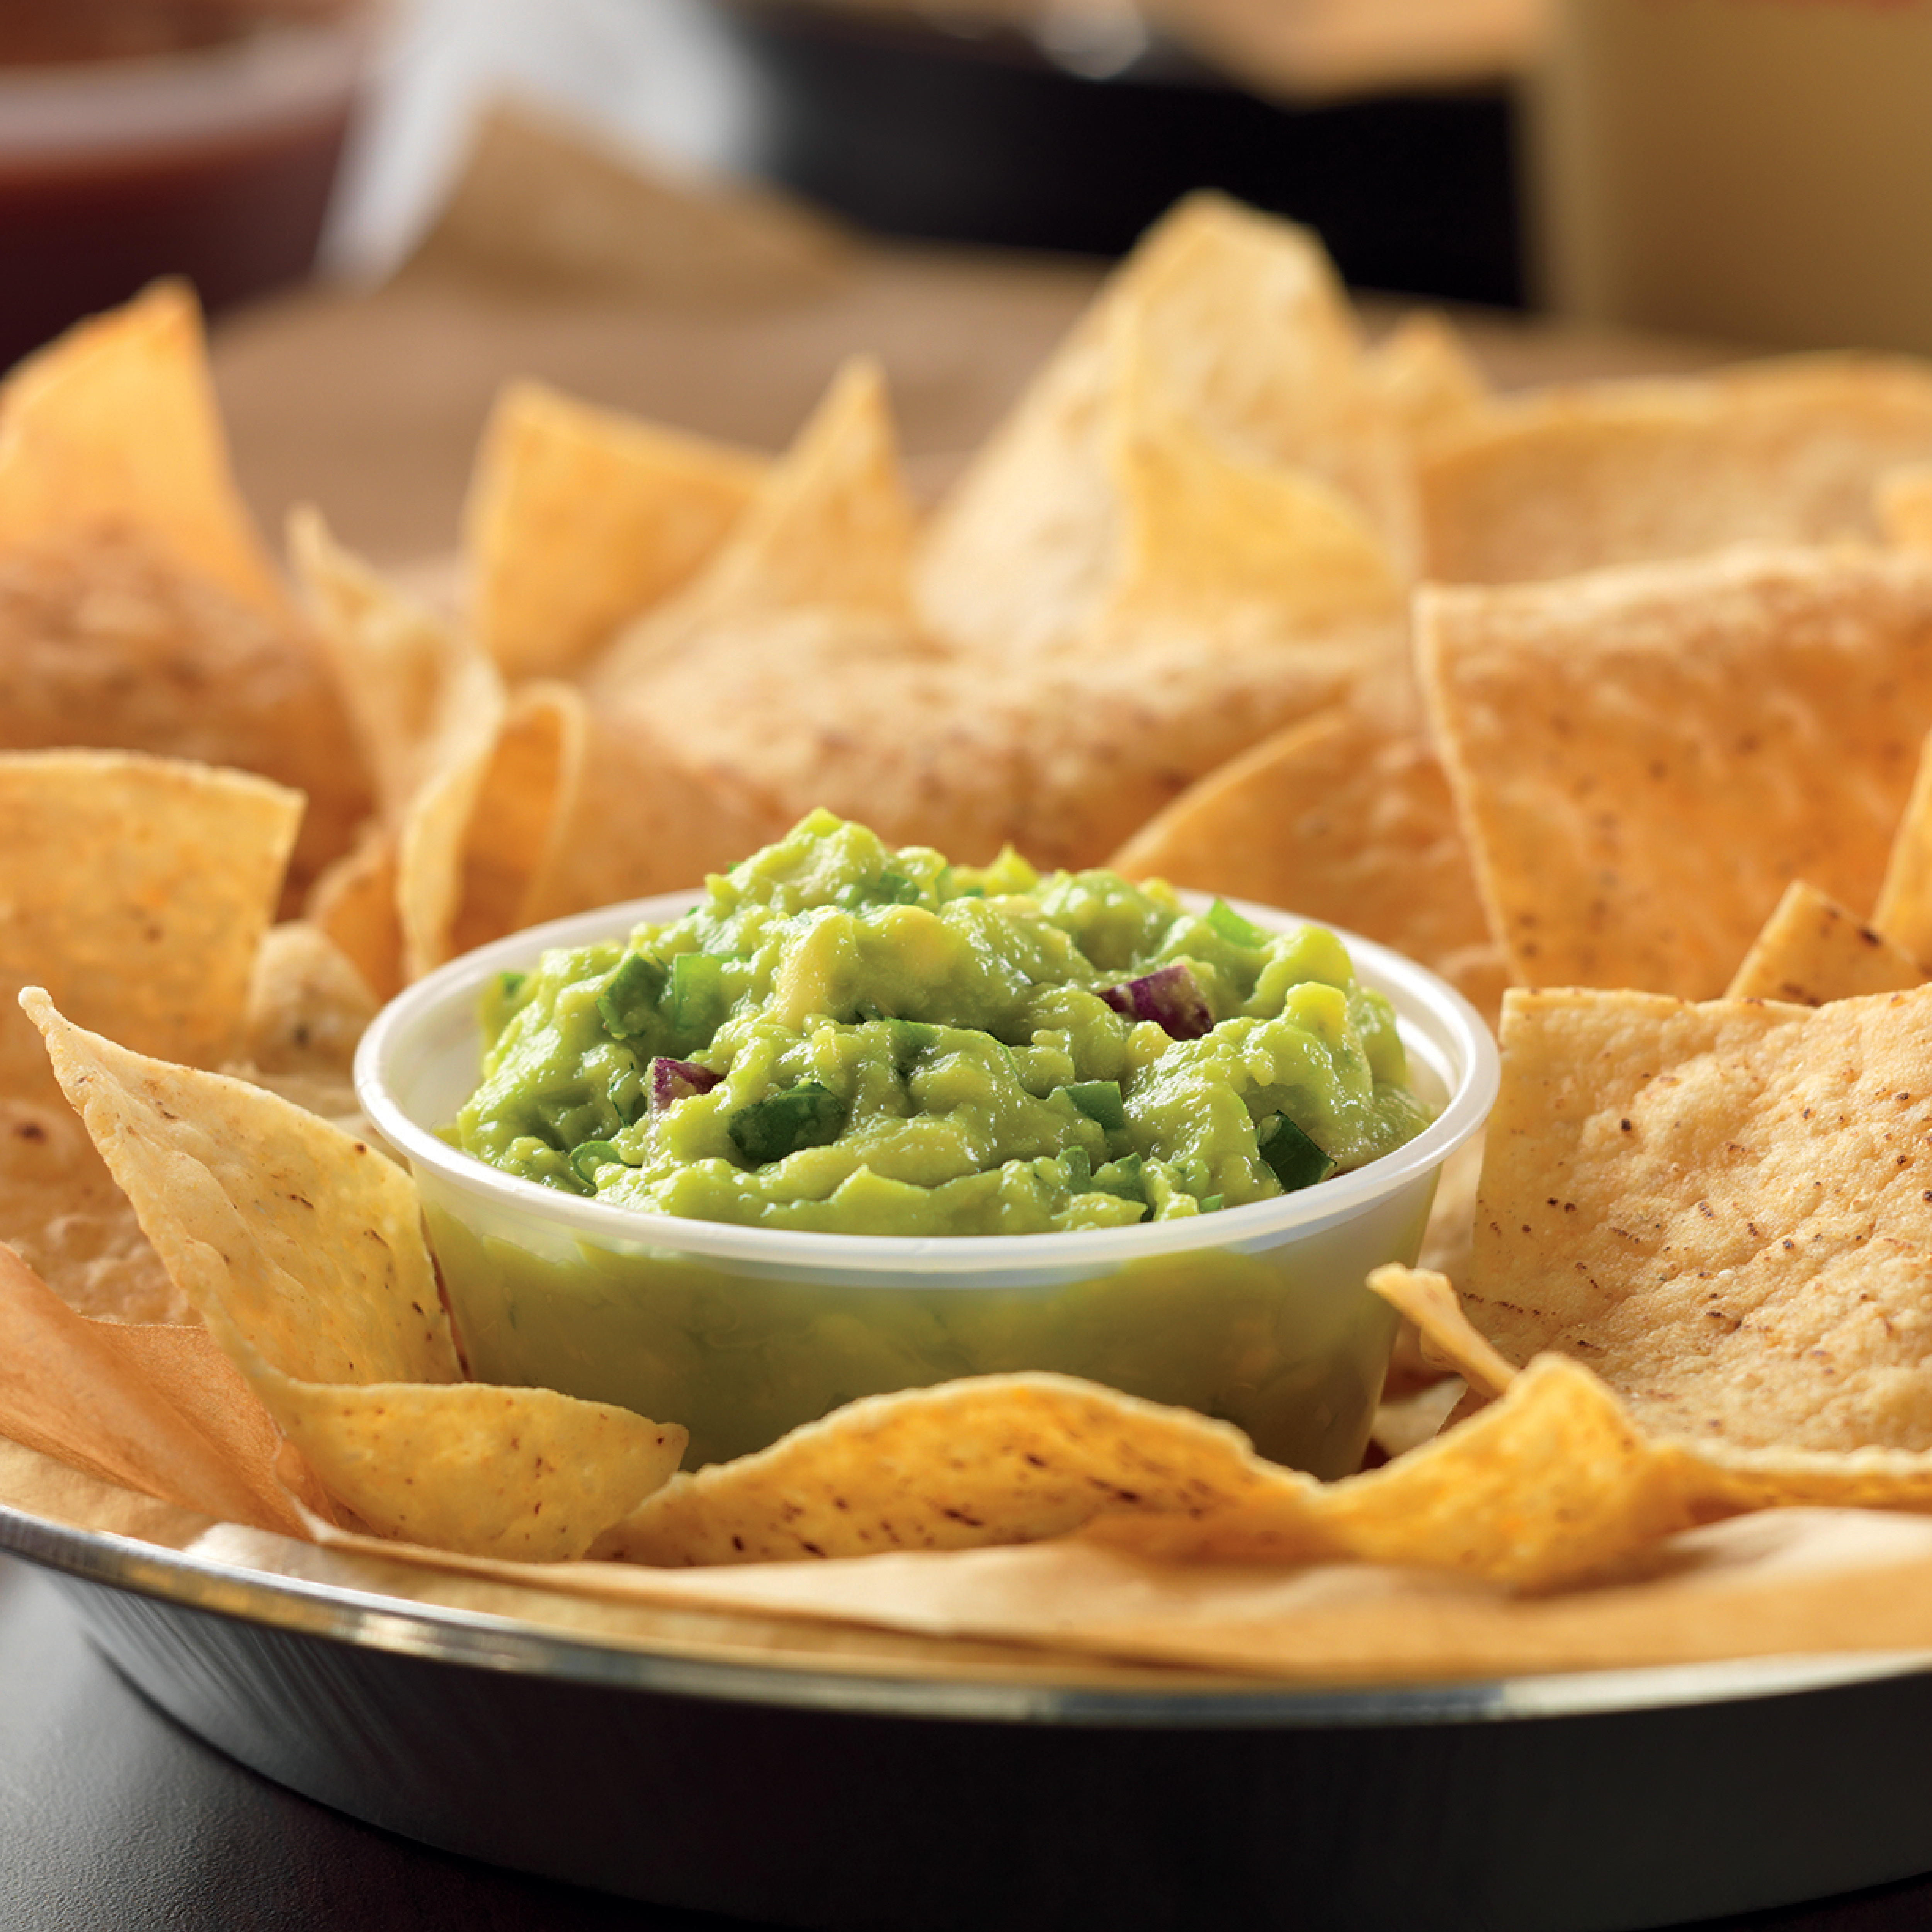 Hand-smashed-in-house-daily guacamole is best served with freshly fried in-house tortilla chips.